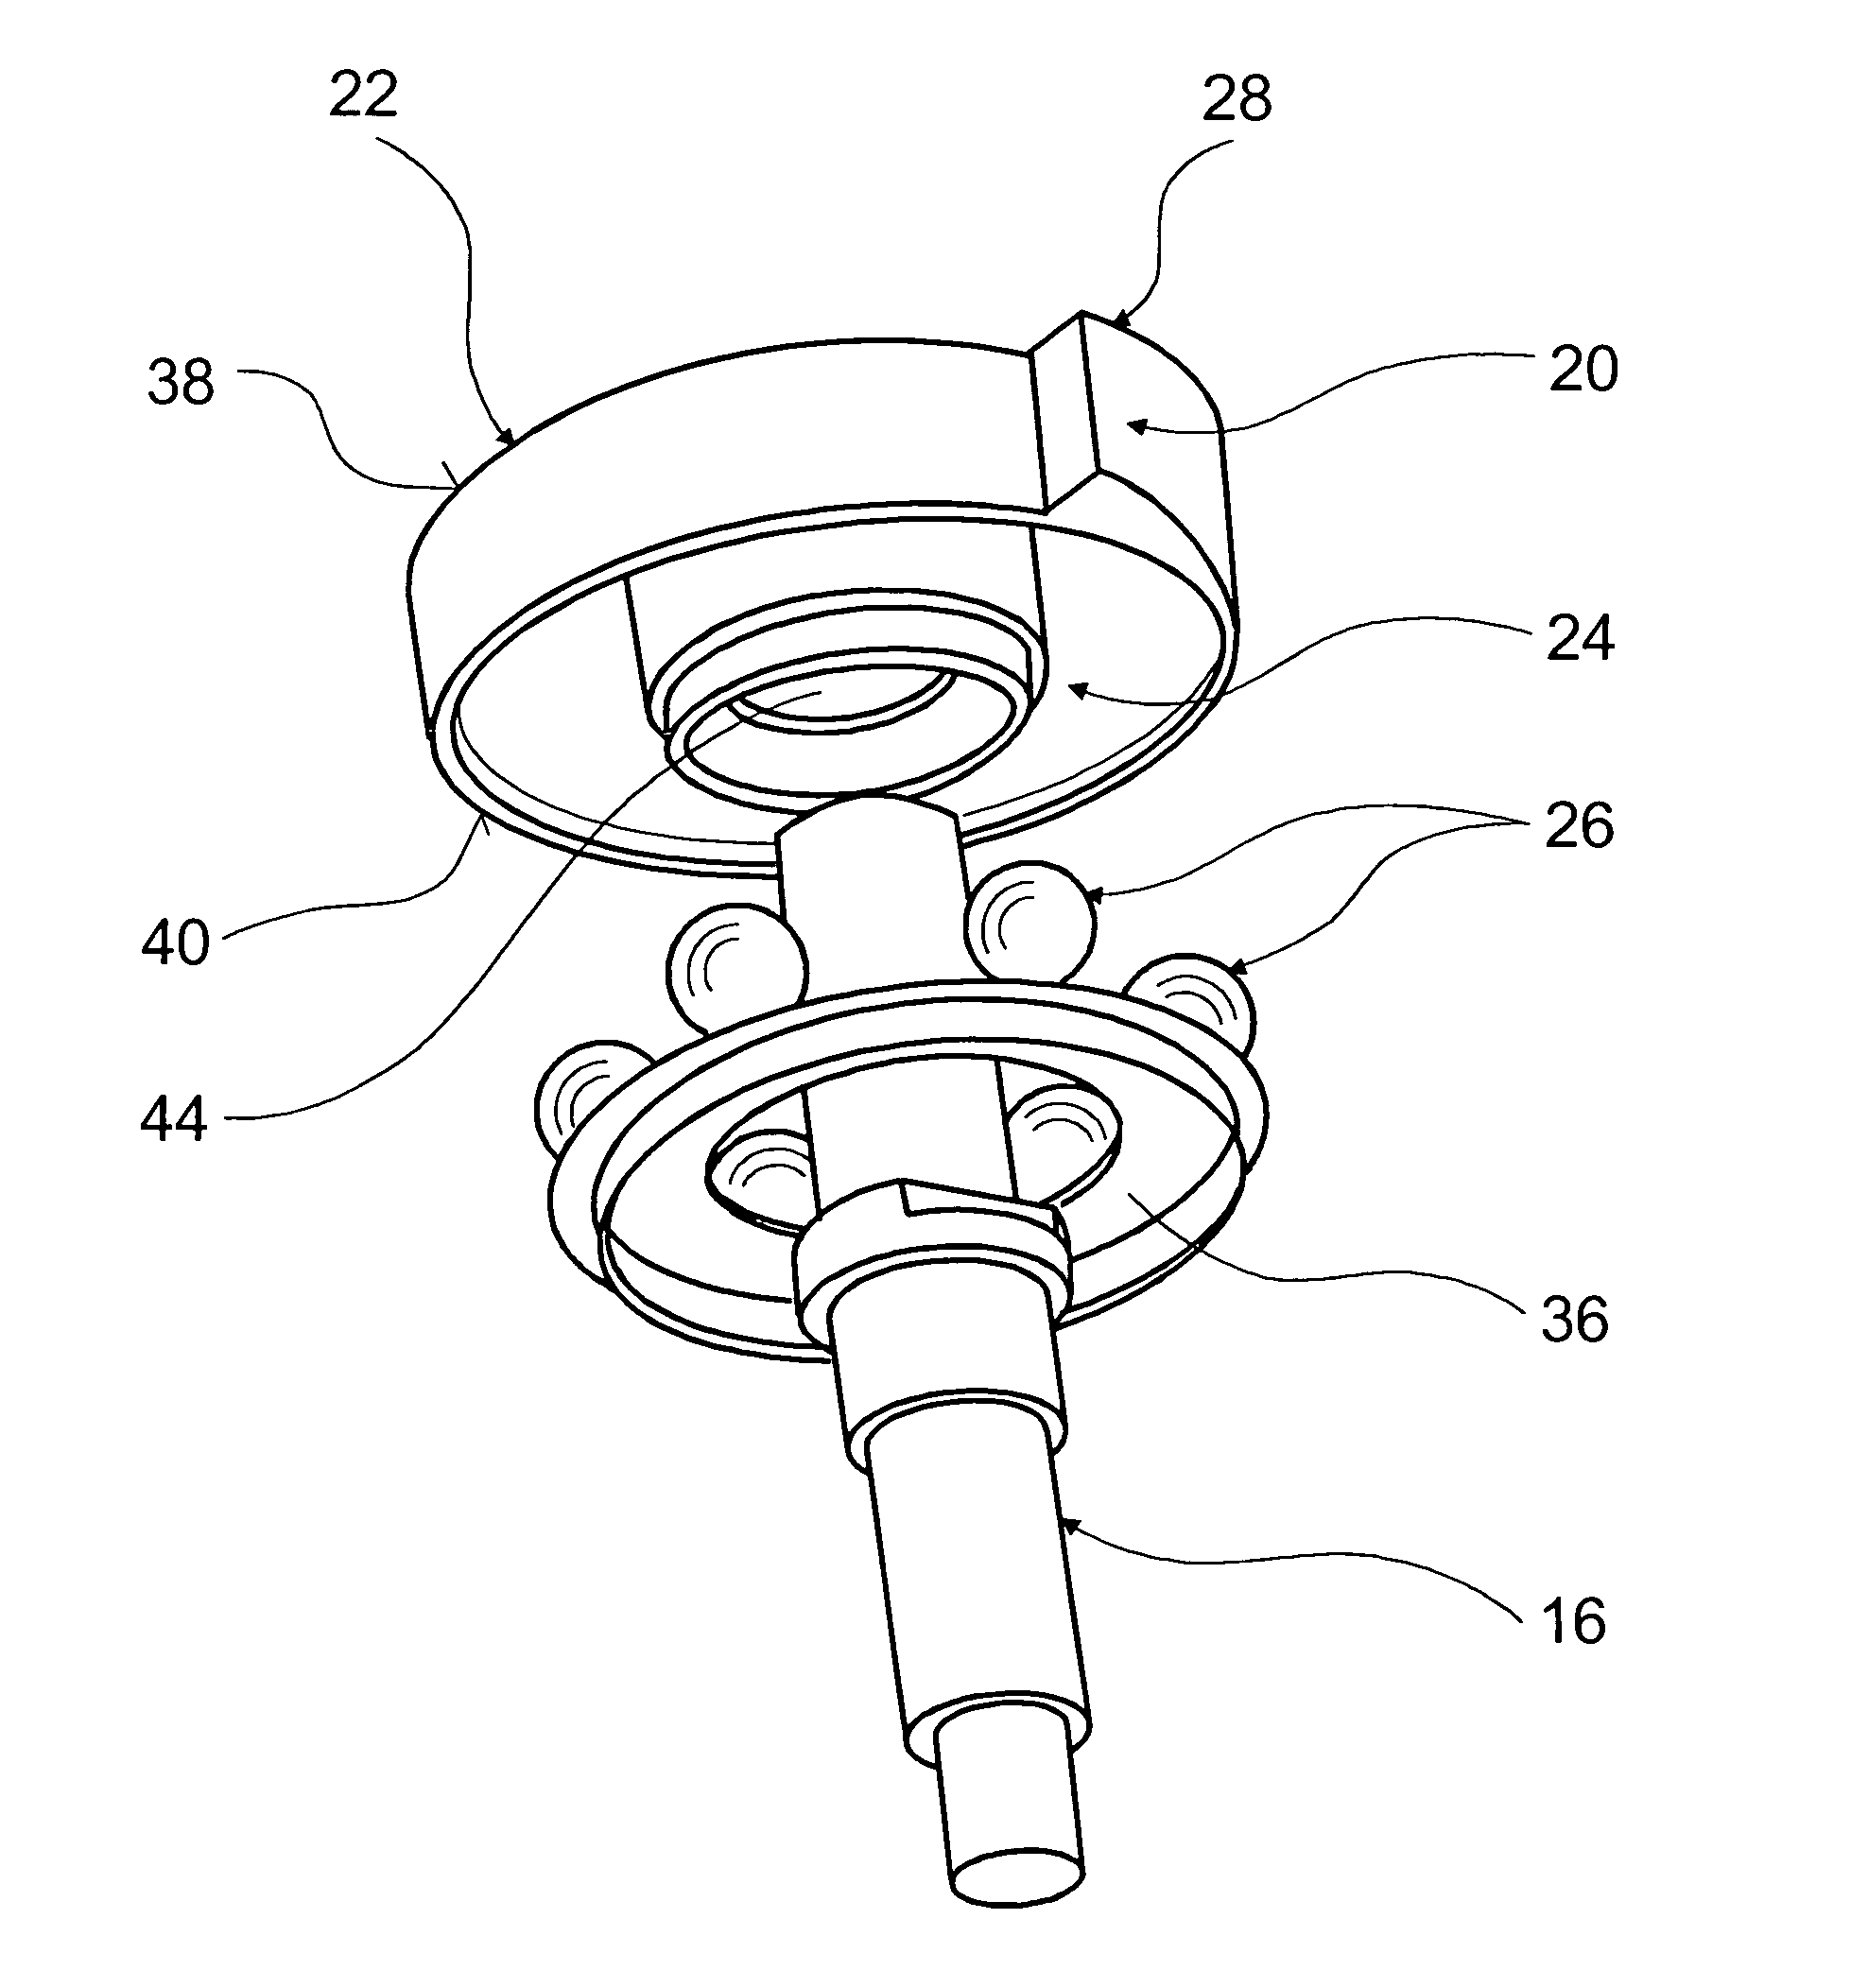 Hand grinder, flange for accomodating a grinding tool, and balancing unit